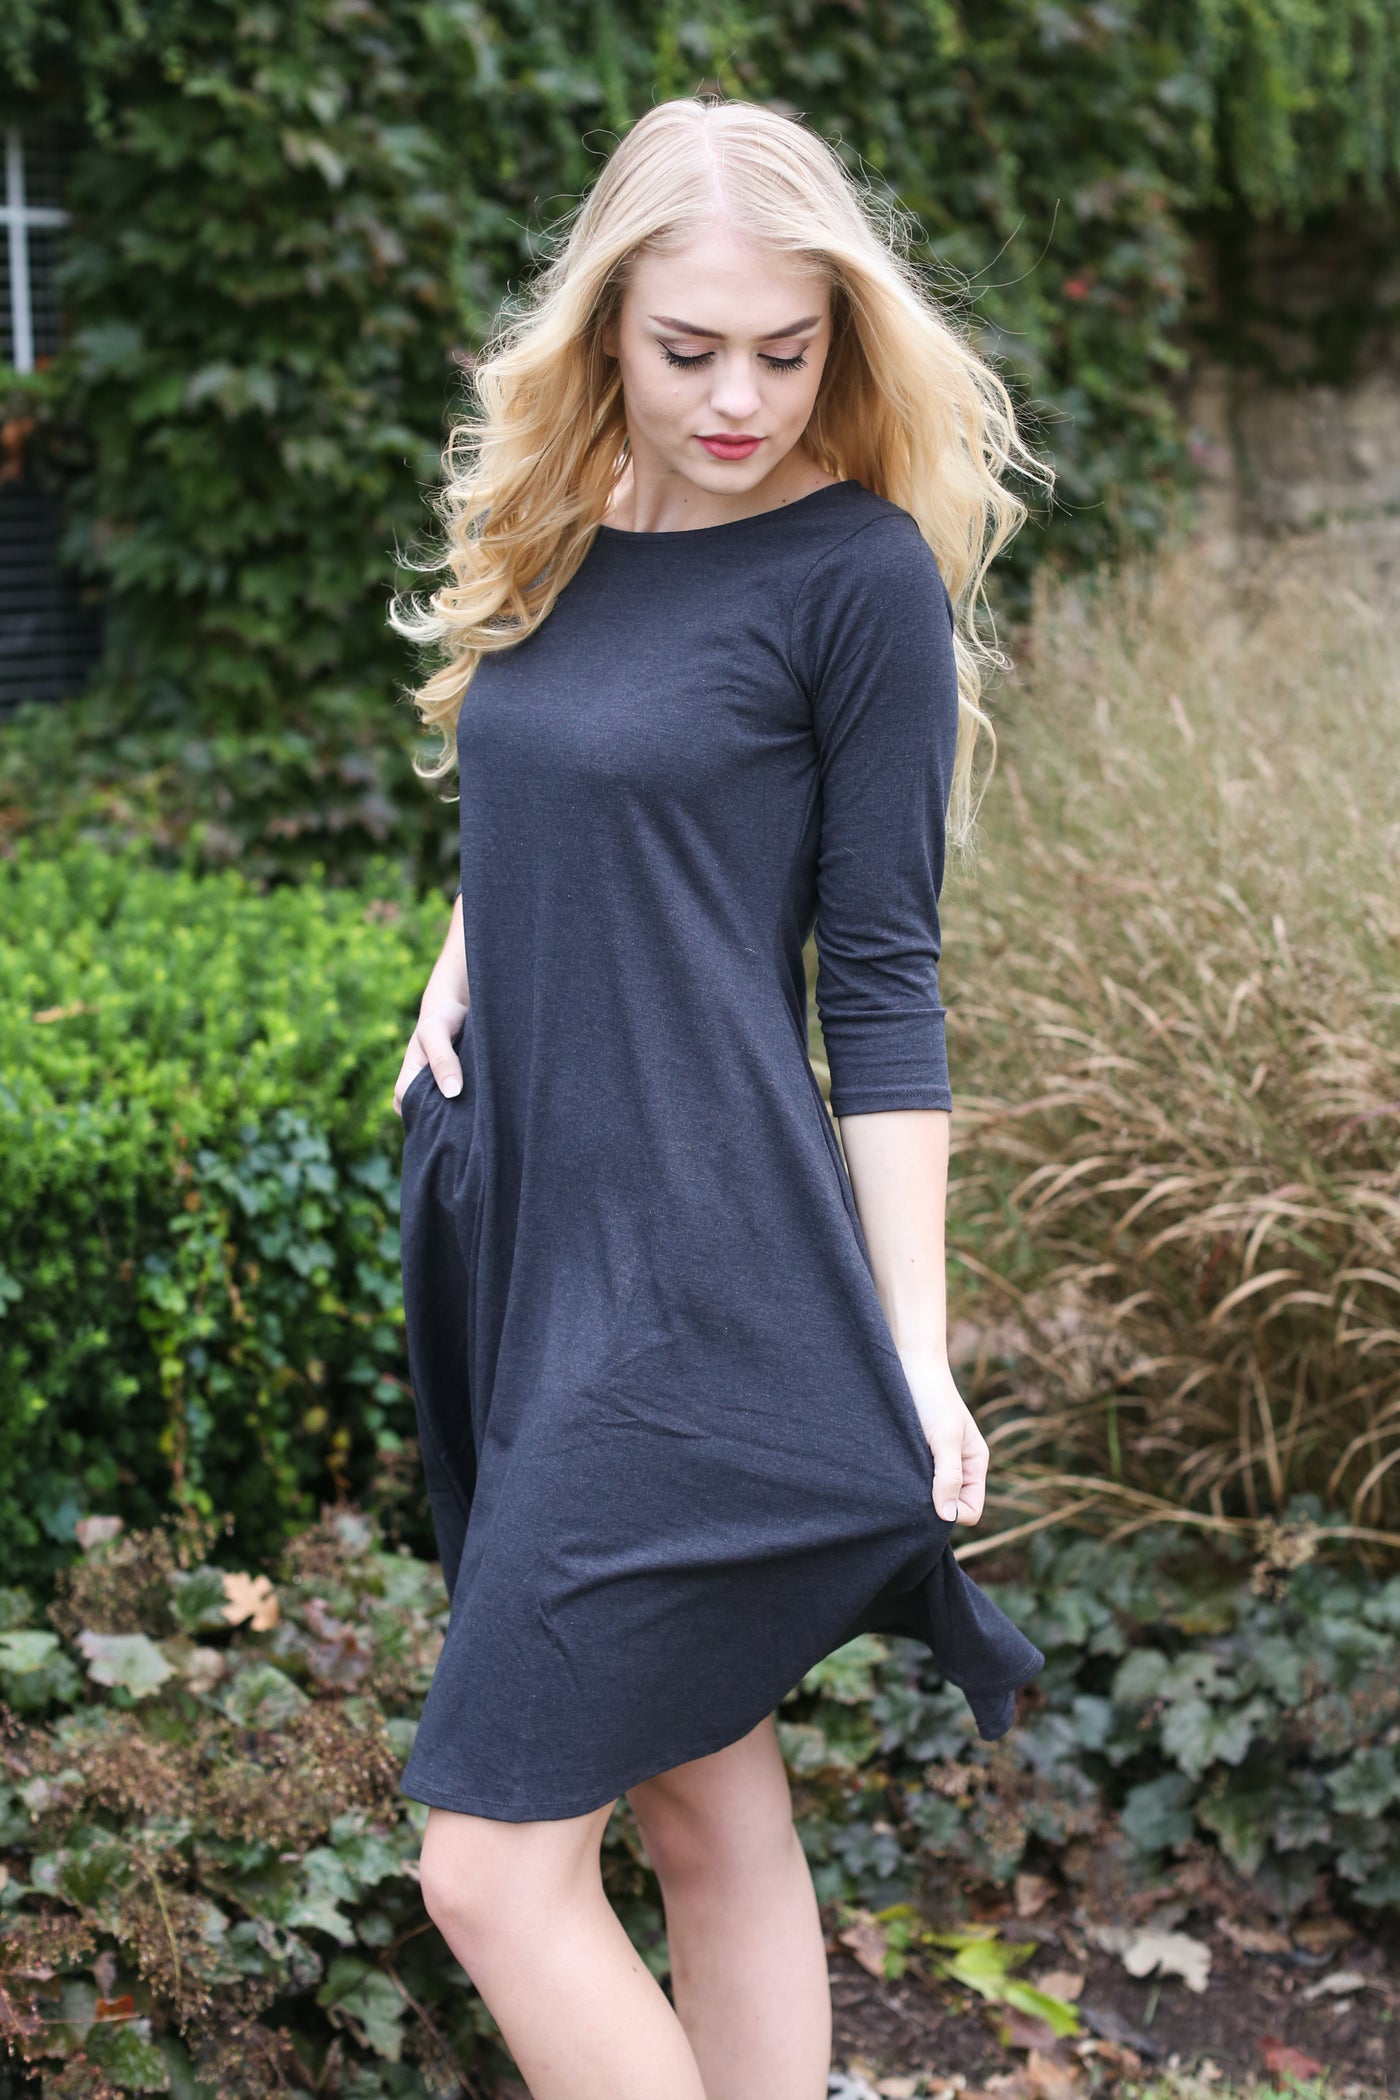 Molly Ann II Charcoal Classic A-Line Dress with Pockets - Melissa Jean Boutique